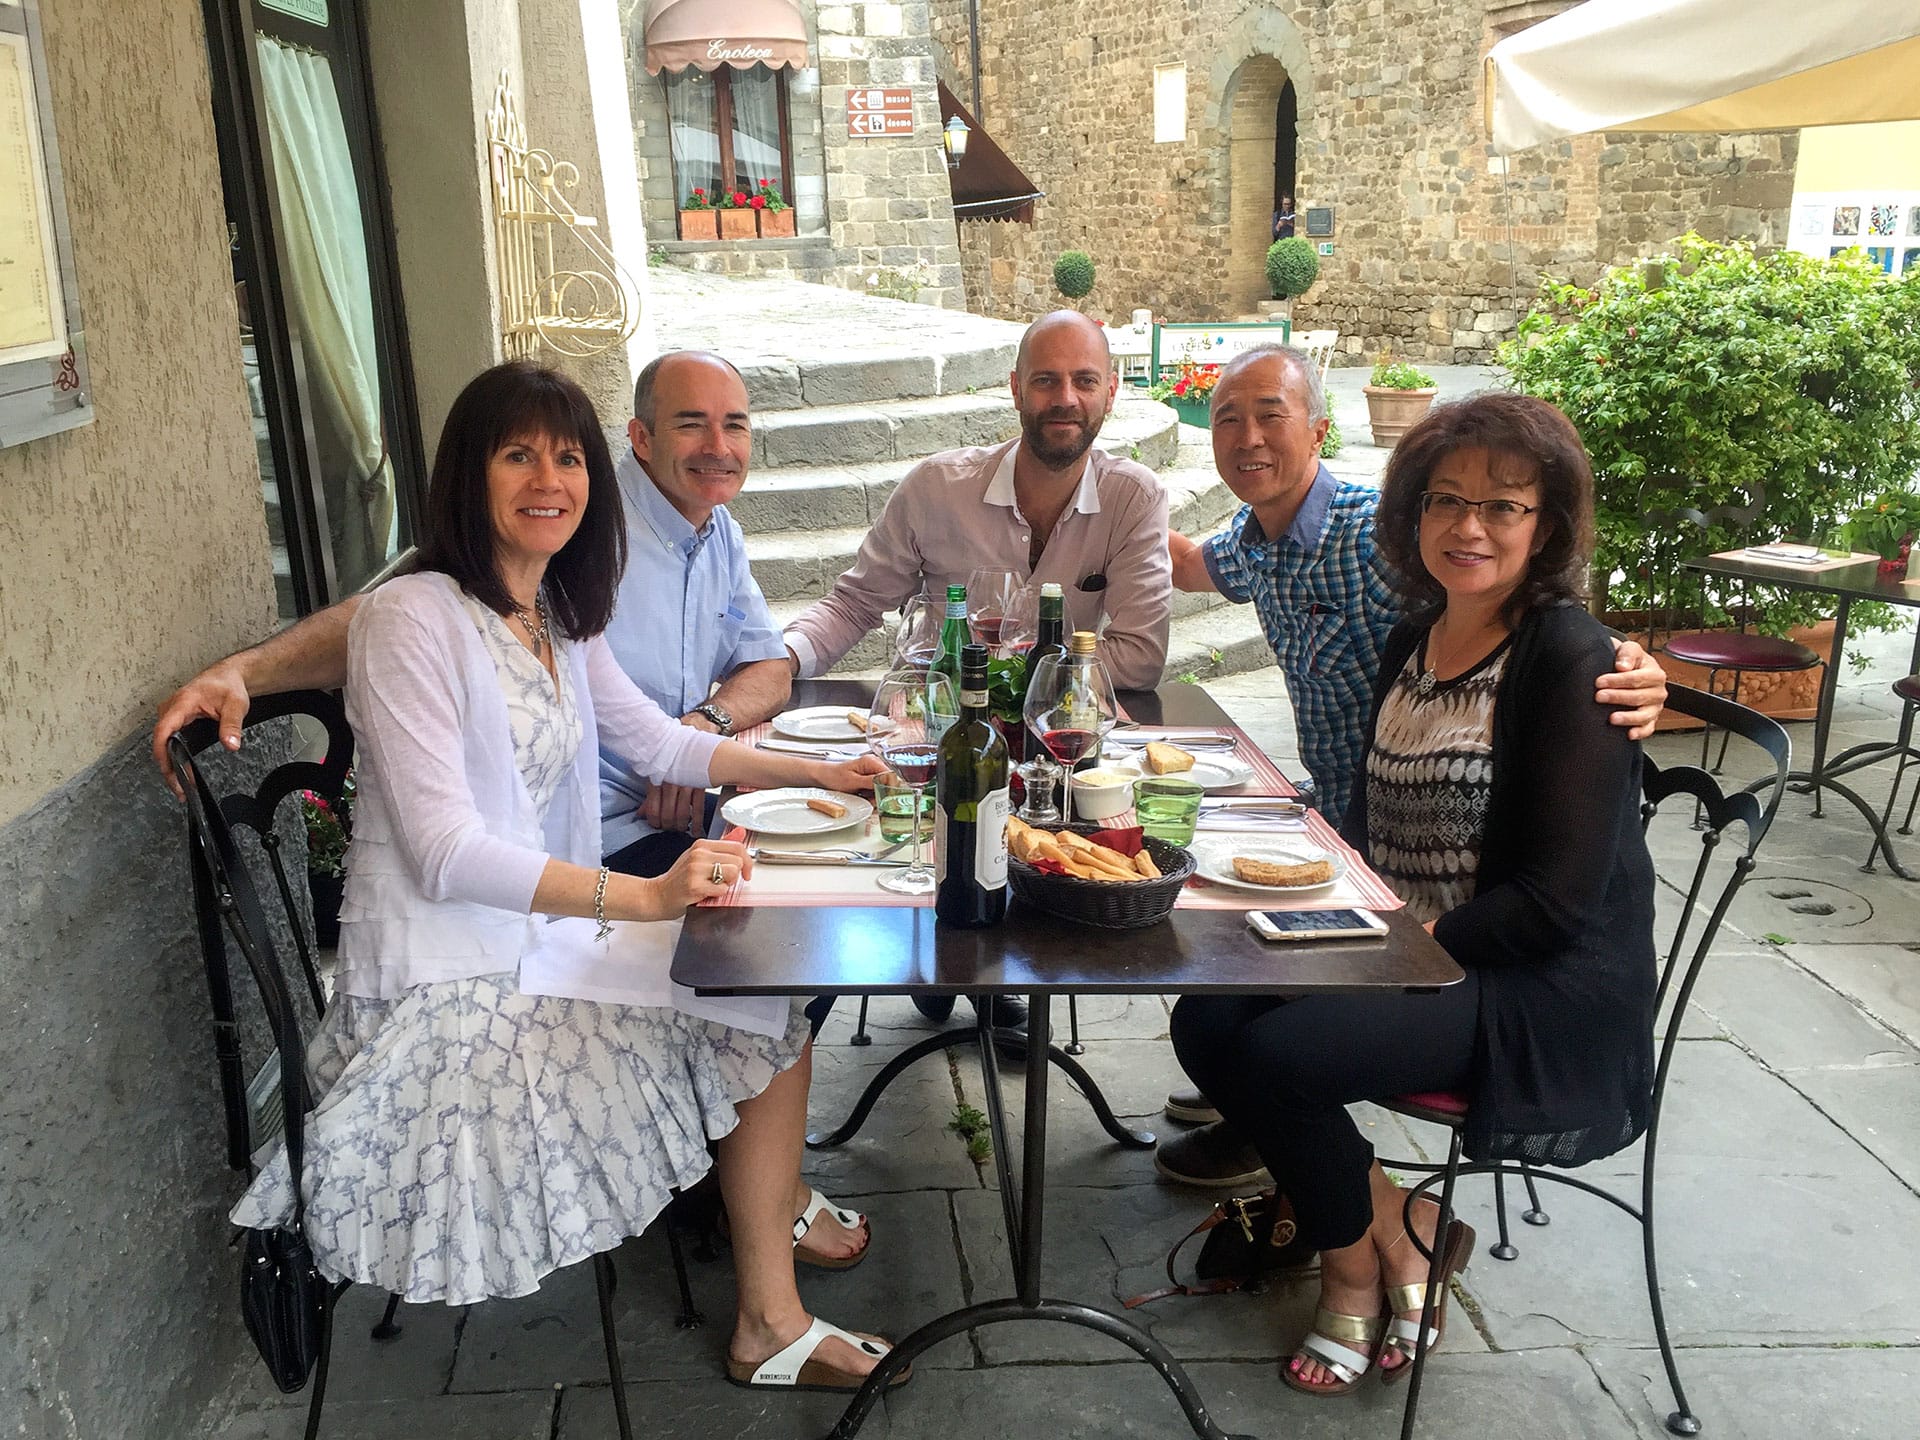 Cortona wine tour photos and images | Pictures of wine and truffle tours in Tuscany and Umbria